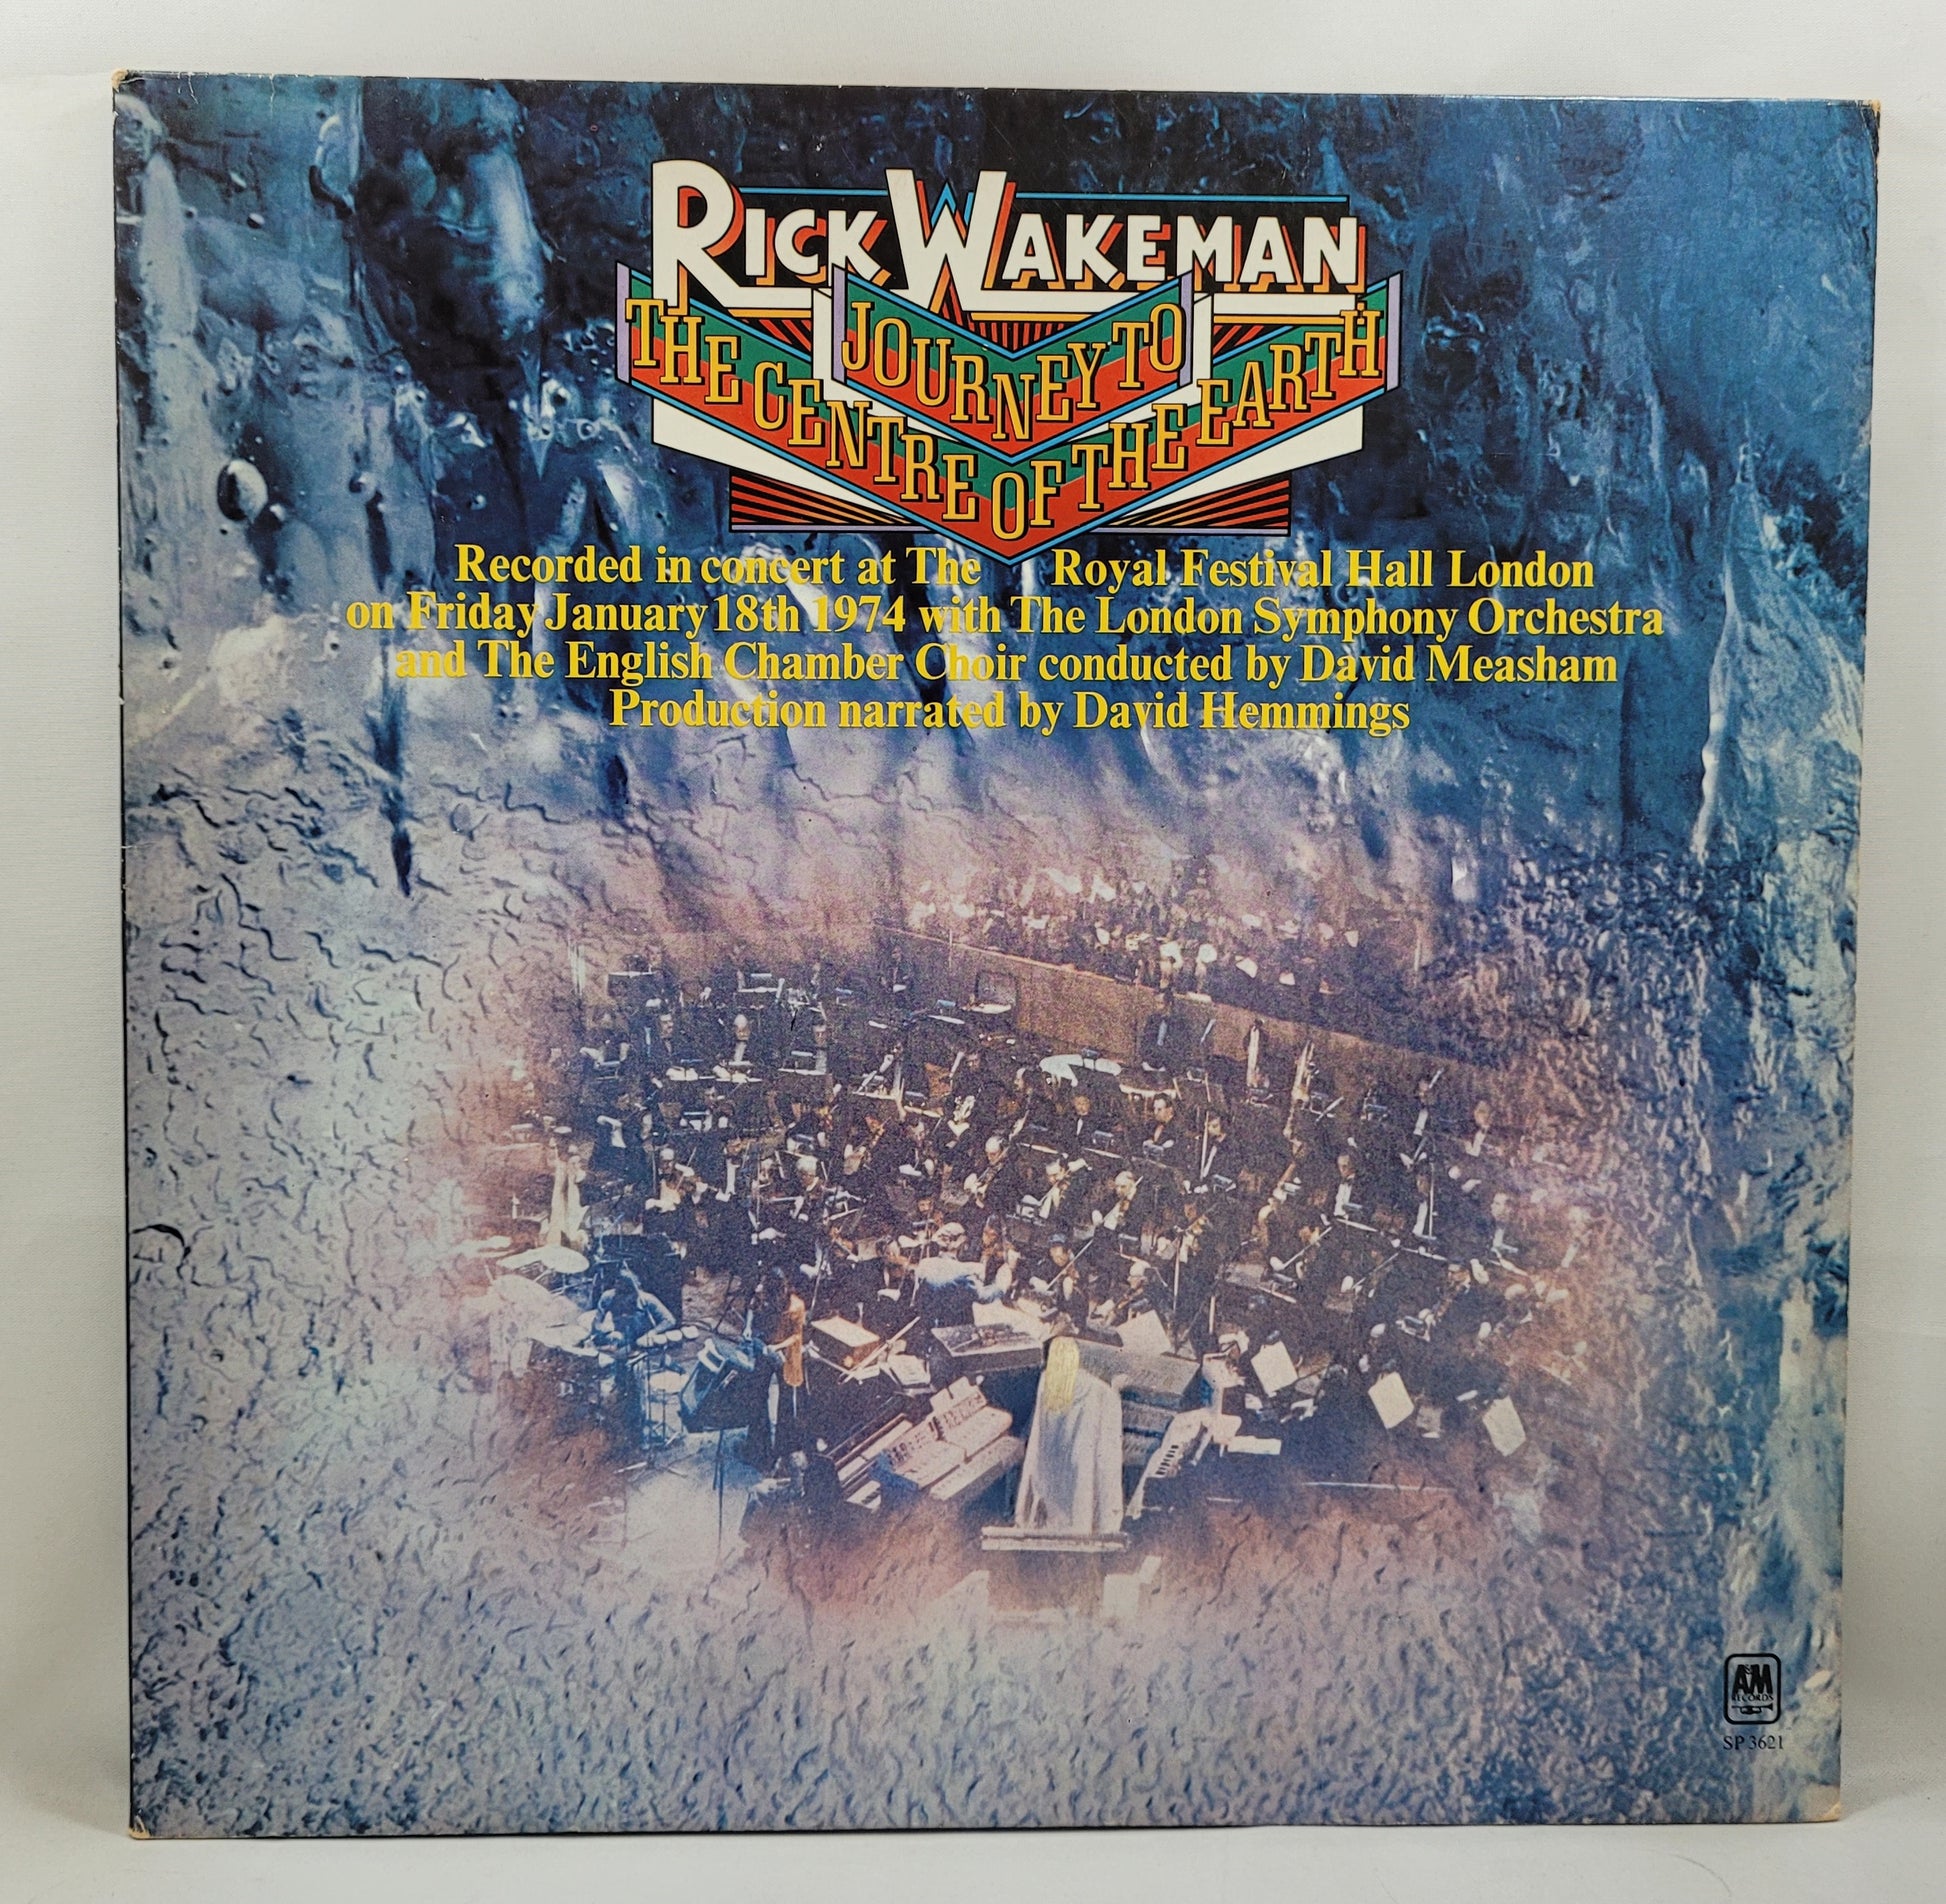 Rick Wakeman - Journey to the Centre of the Earth [1974 Used Vinyl Record LP]